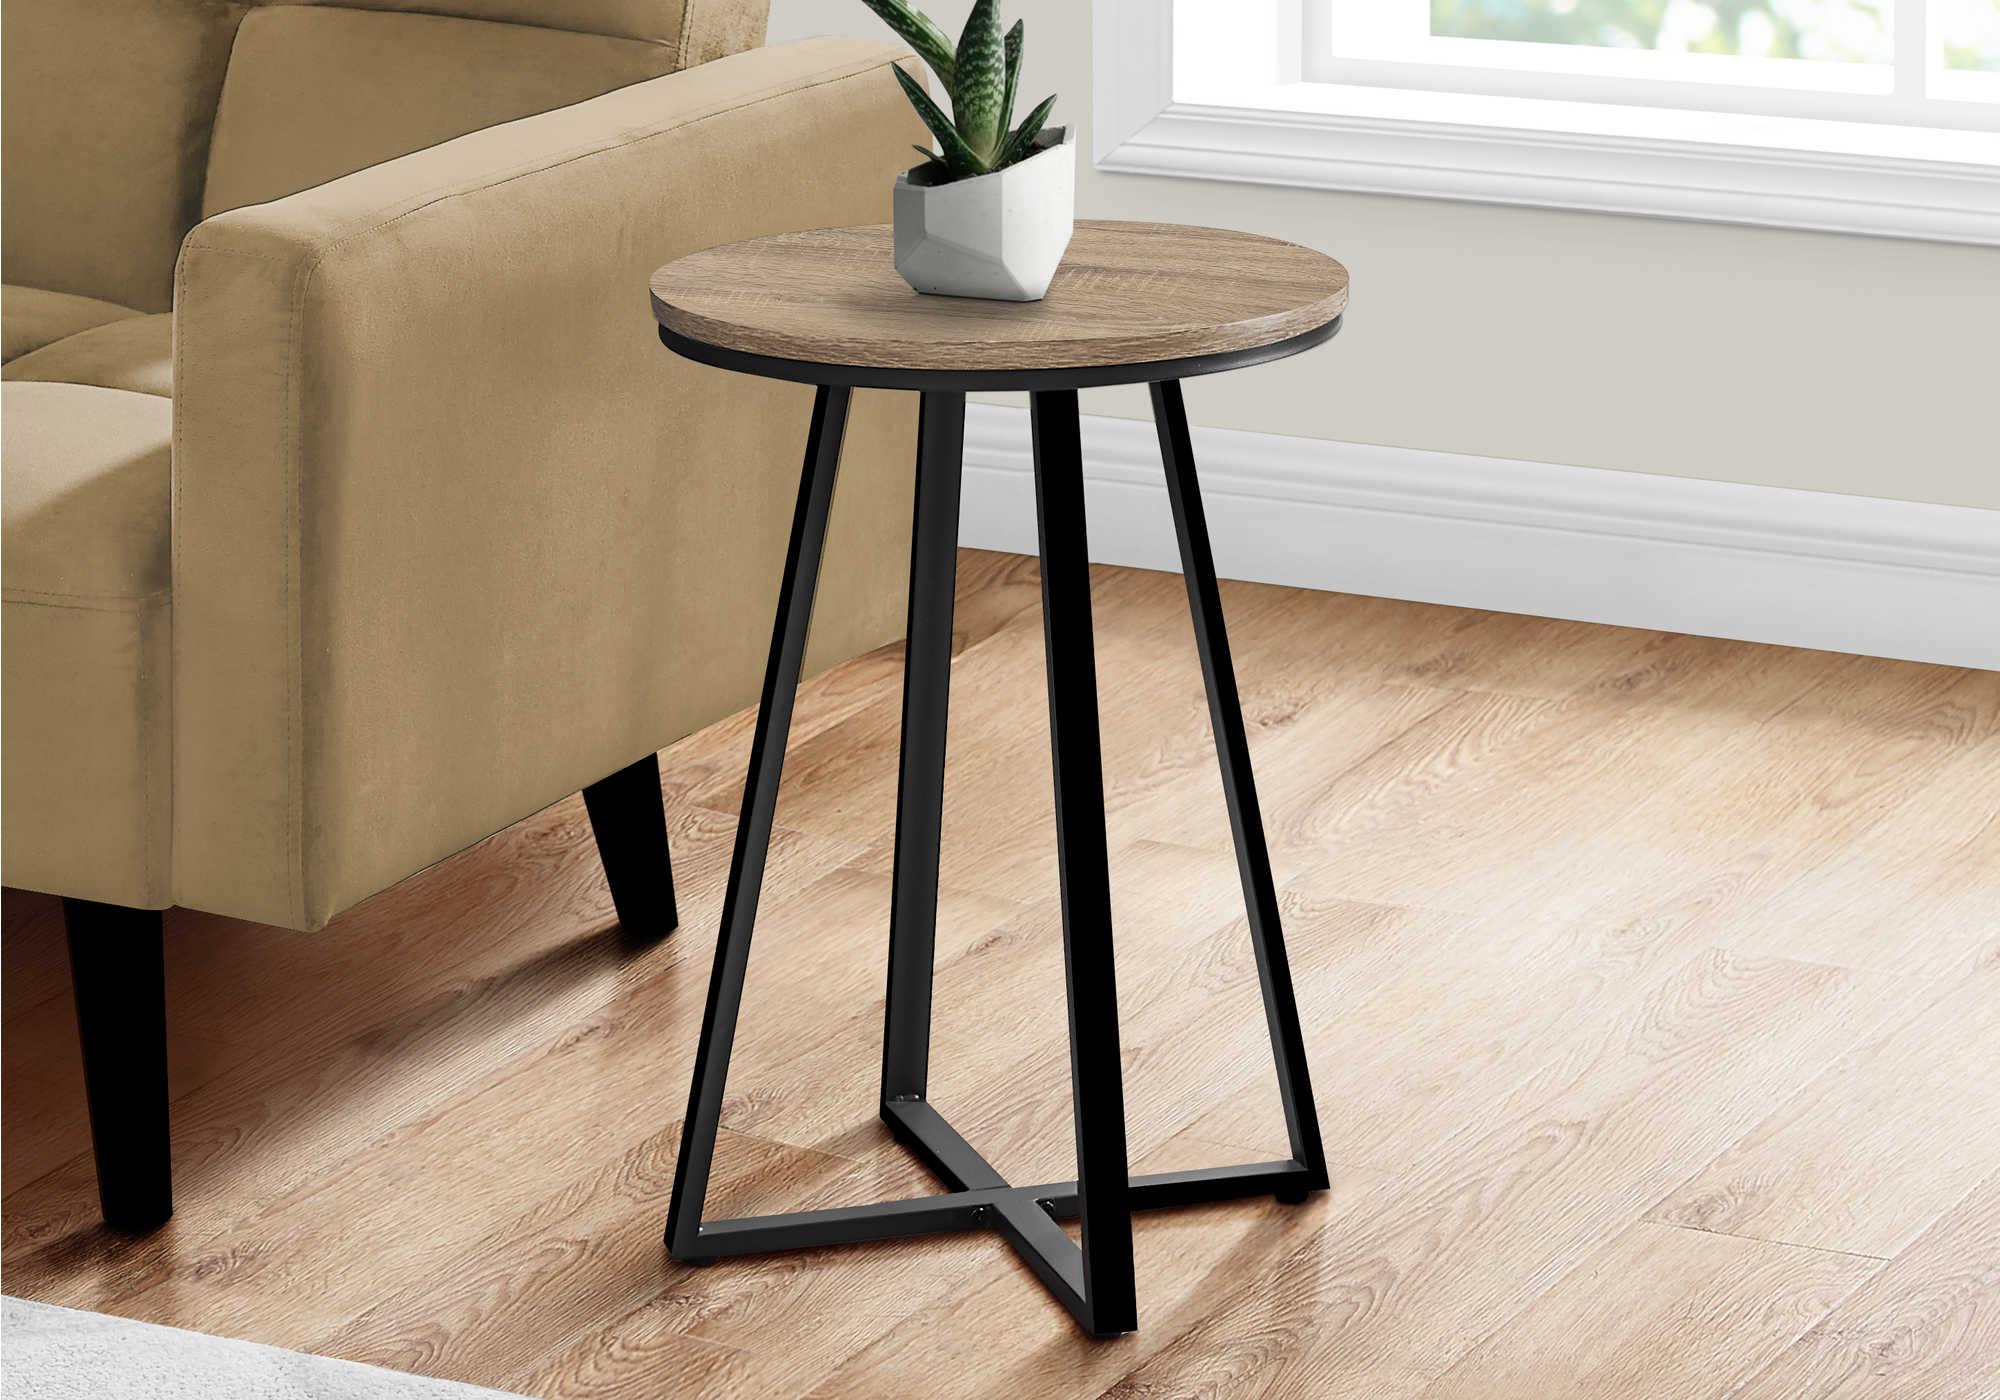 I 2177 - ACCENT TABLE - 22"H / DARK TAUPE / BLACK METAL BY MONARCH SPECIALTIES INC